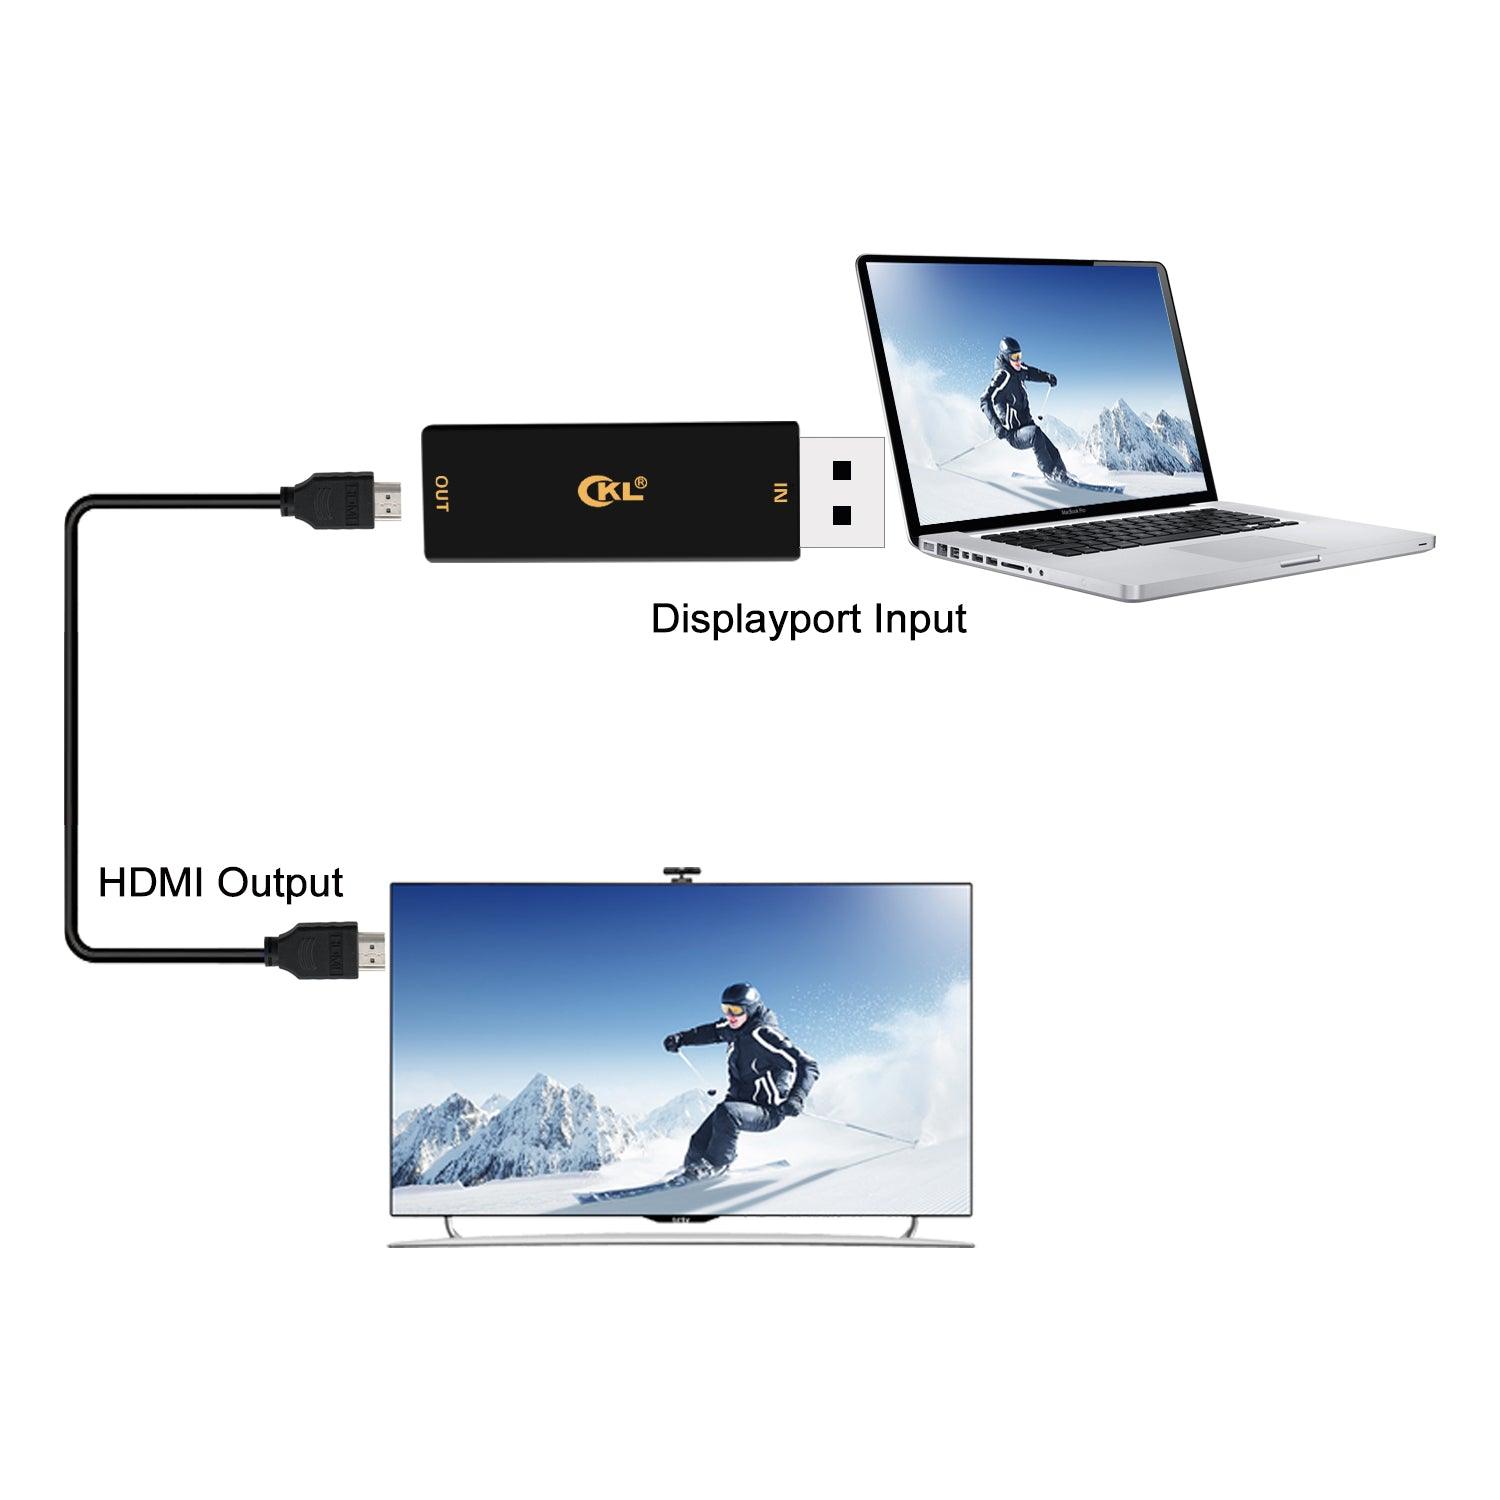 CKL Displayport to HDMI Adapter Male to Female,High Resolution up to 4Kx2K, 3840x2160@60Hz. Support HDCP - CKL KVM Switches